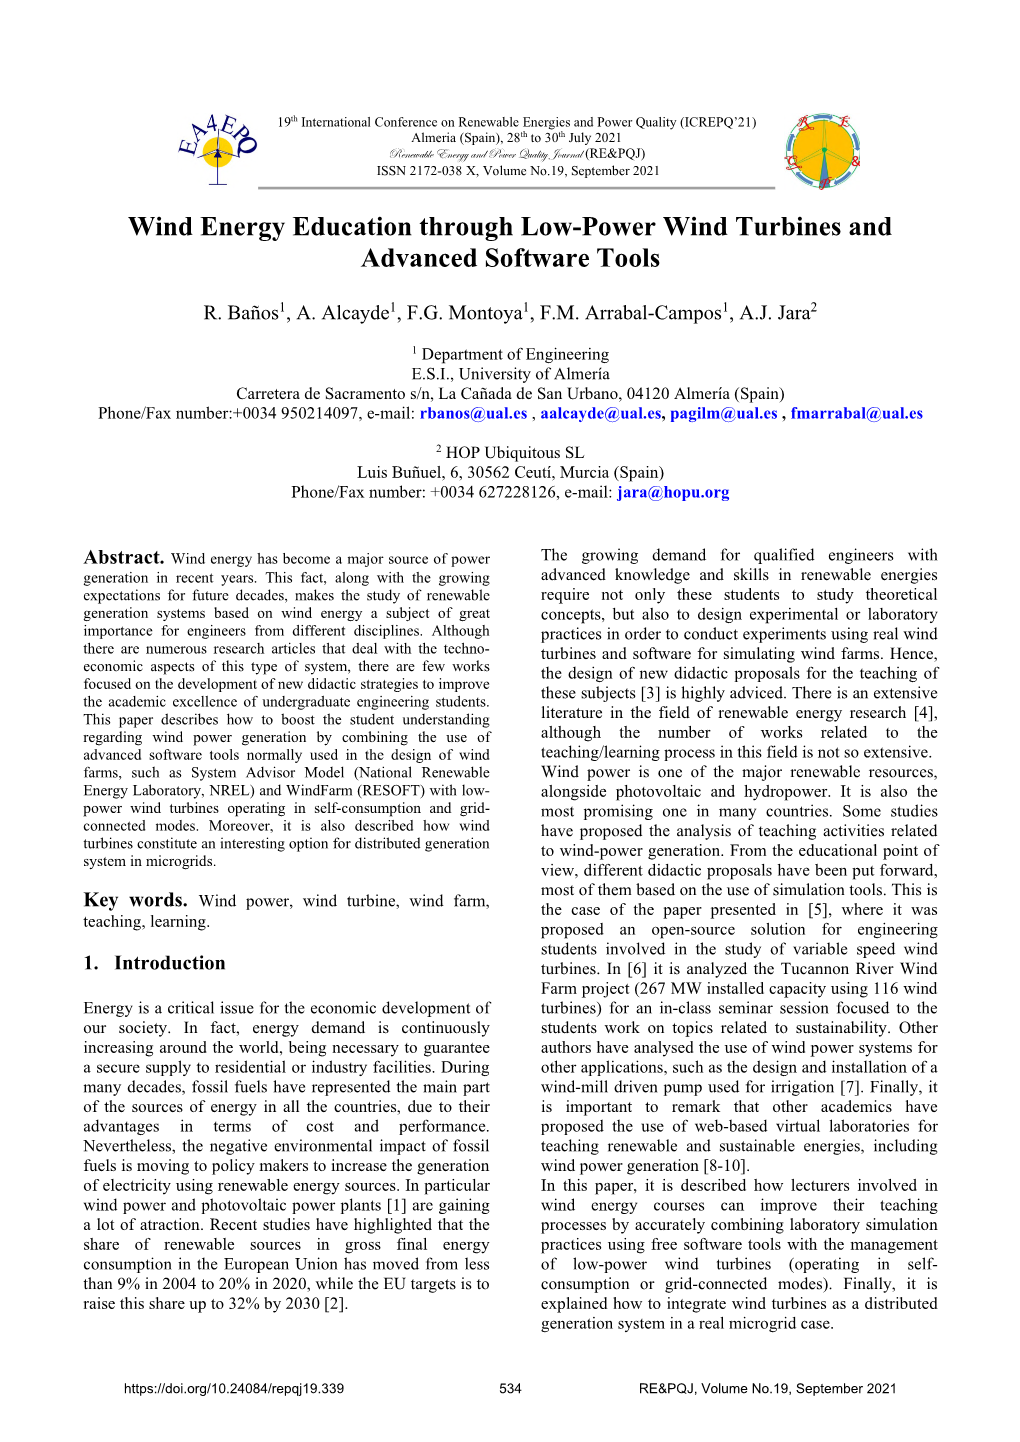 Wind Energy Education Through Low-Power Wind Turbines and Advanced Software Tools